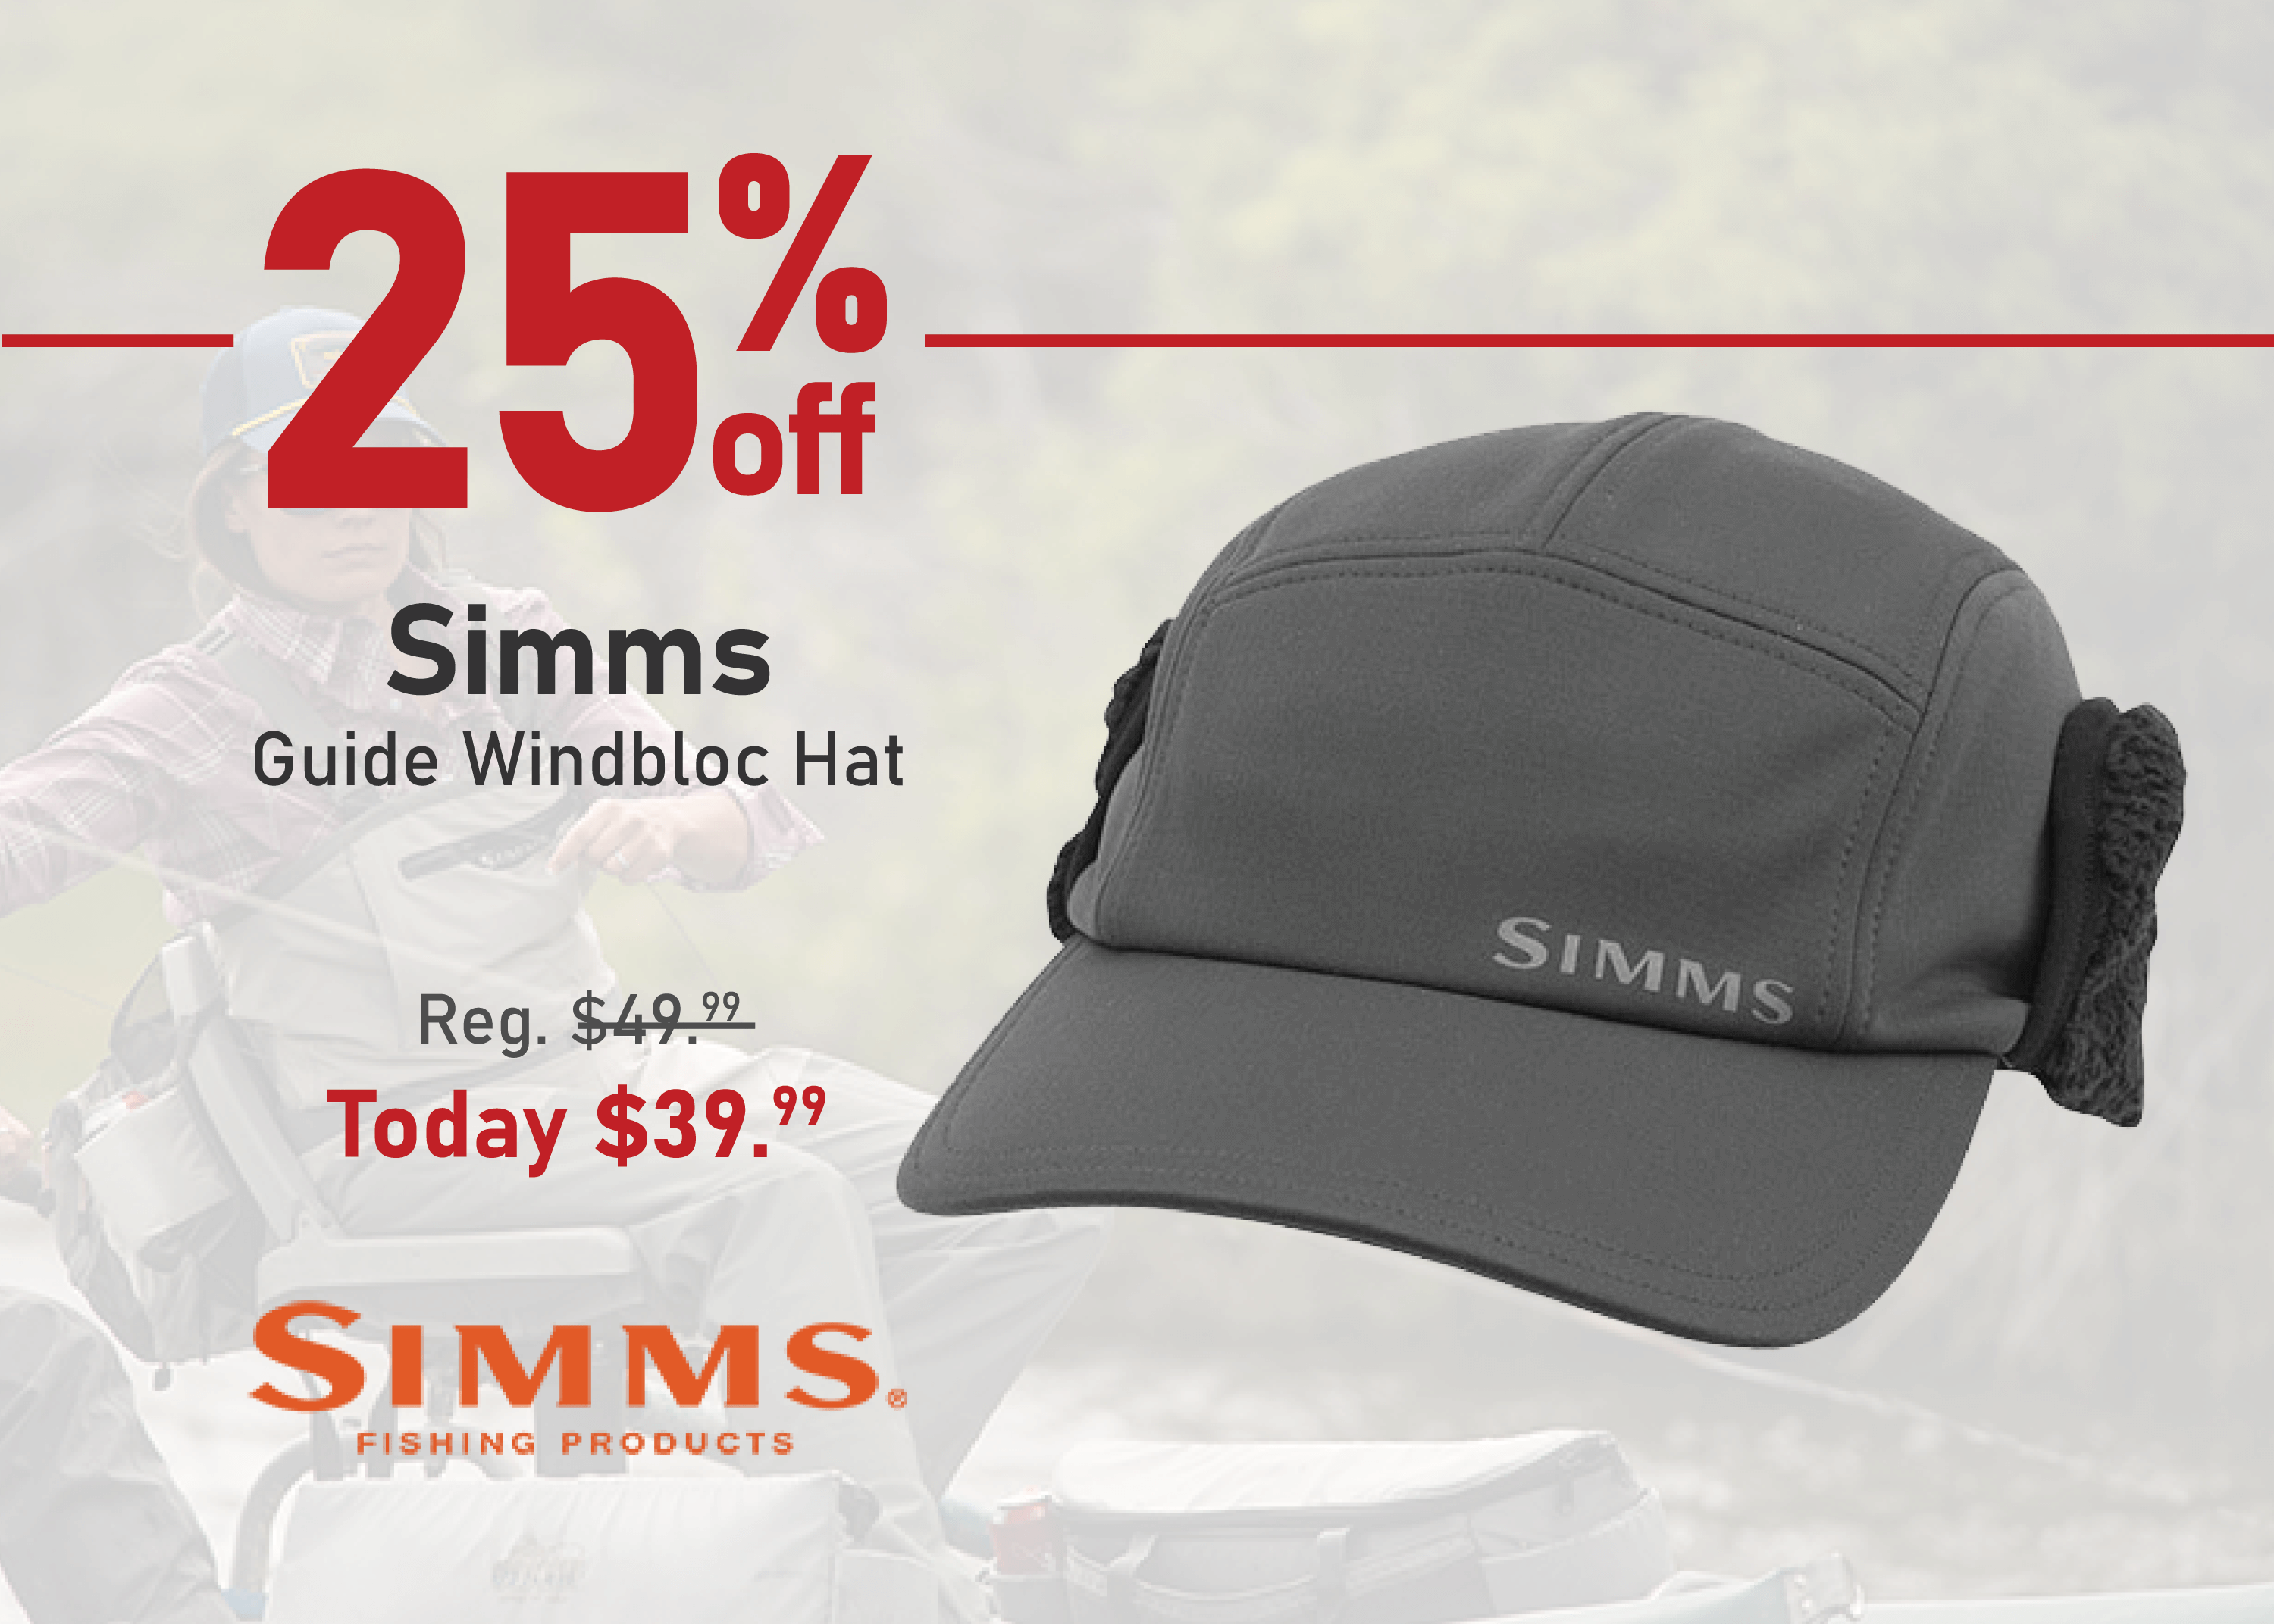 Save 25% on the Simms Guide Windbloc Hat